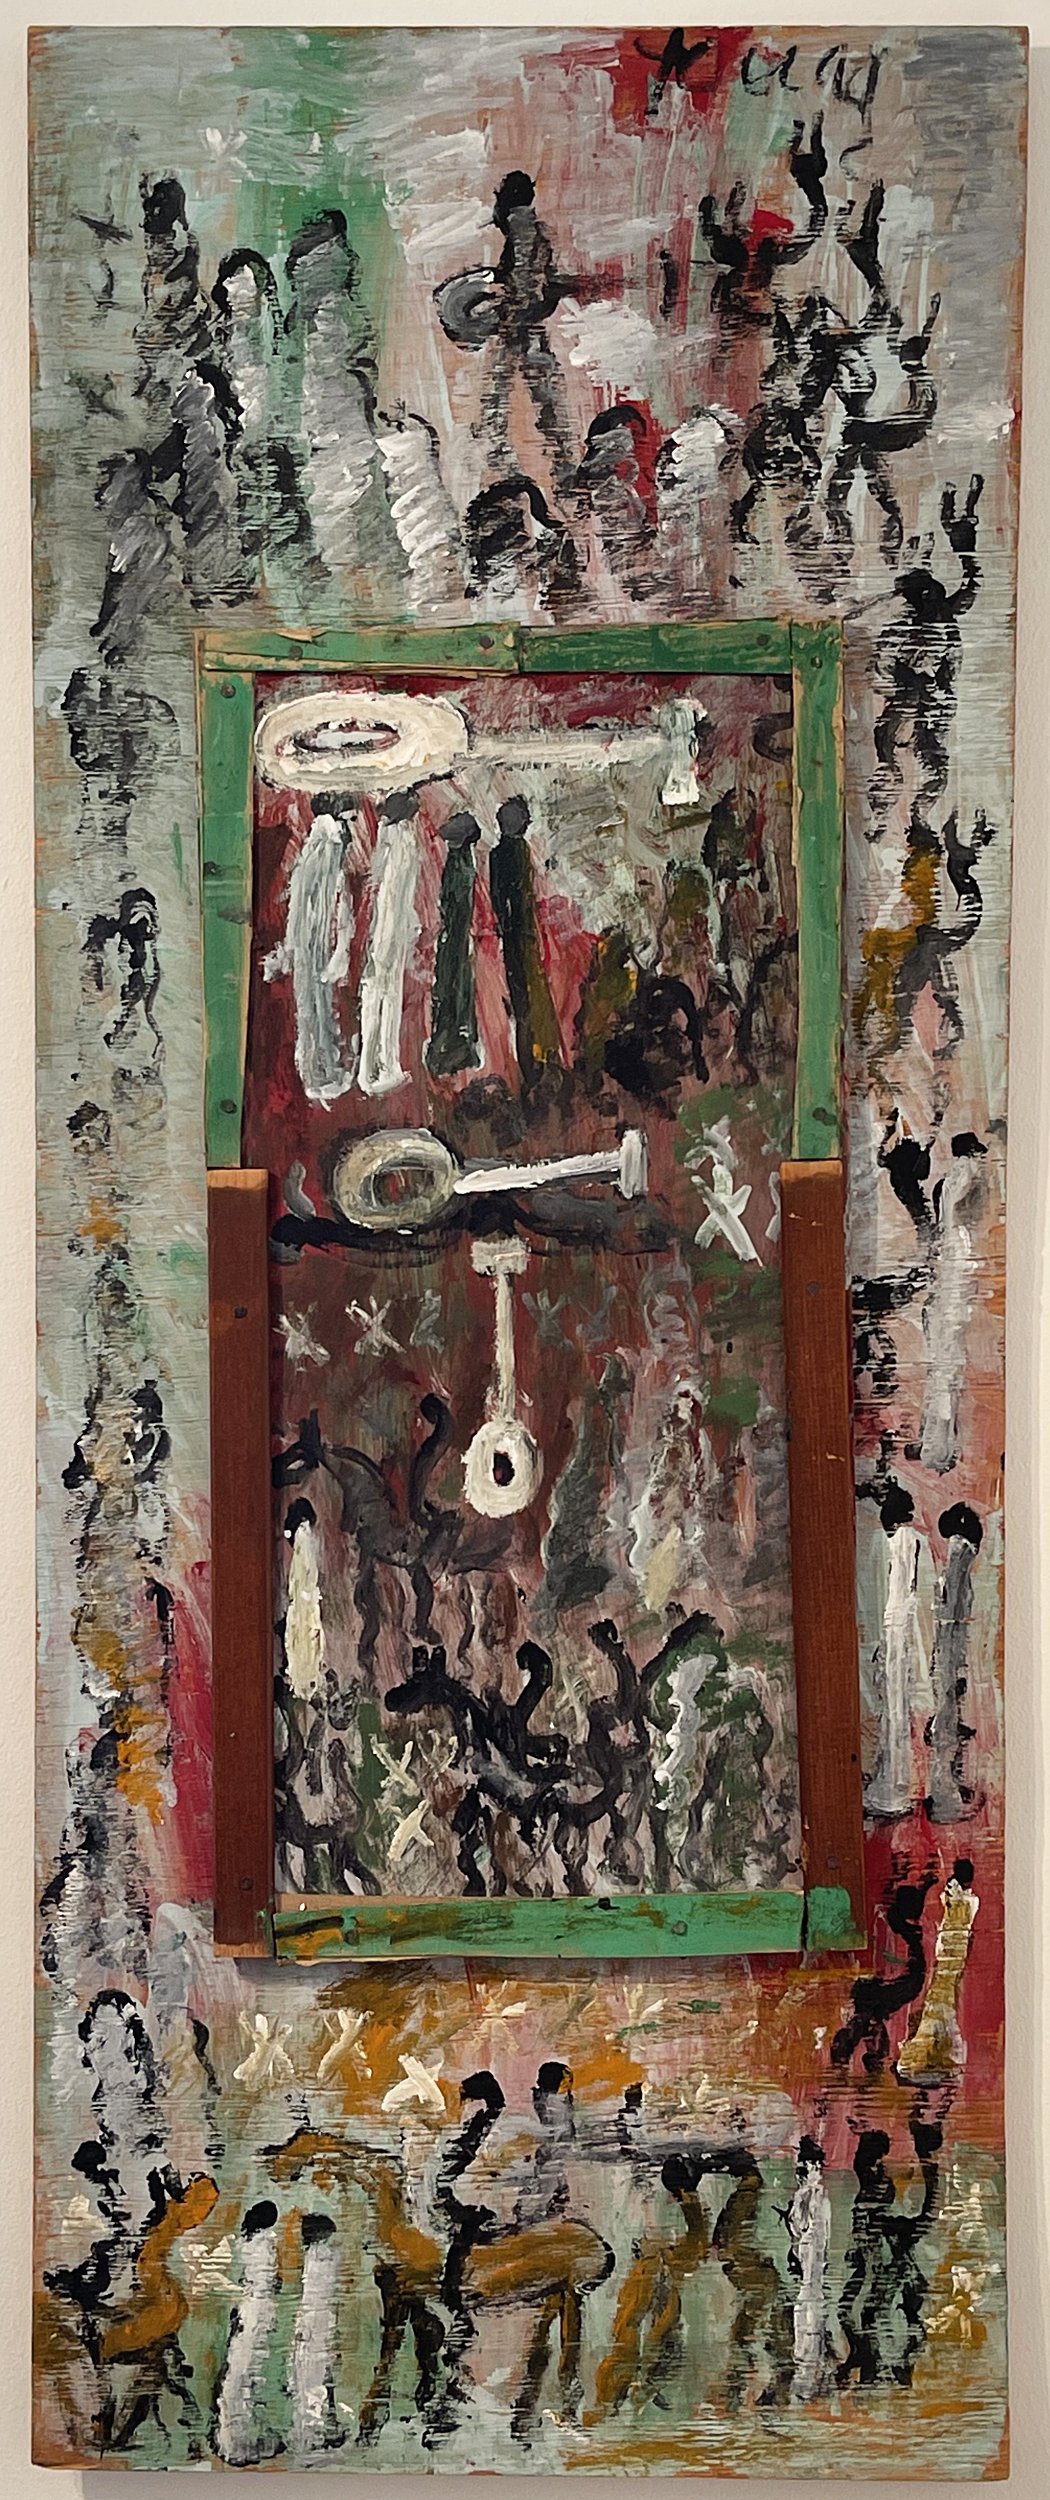   Purvis Young    Untitled(Guitars, Warriors, Horses)   ca. 1990s  48” x 19.25”  Enamel on wood construction    Find Out More   